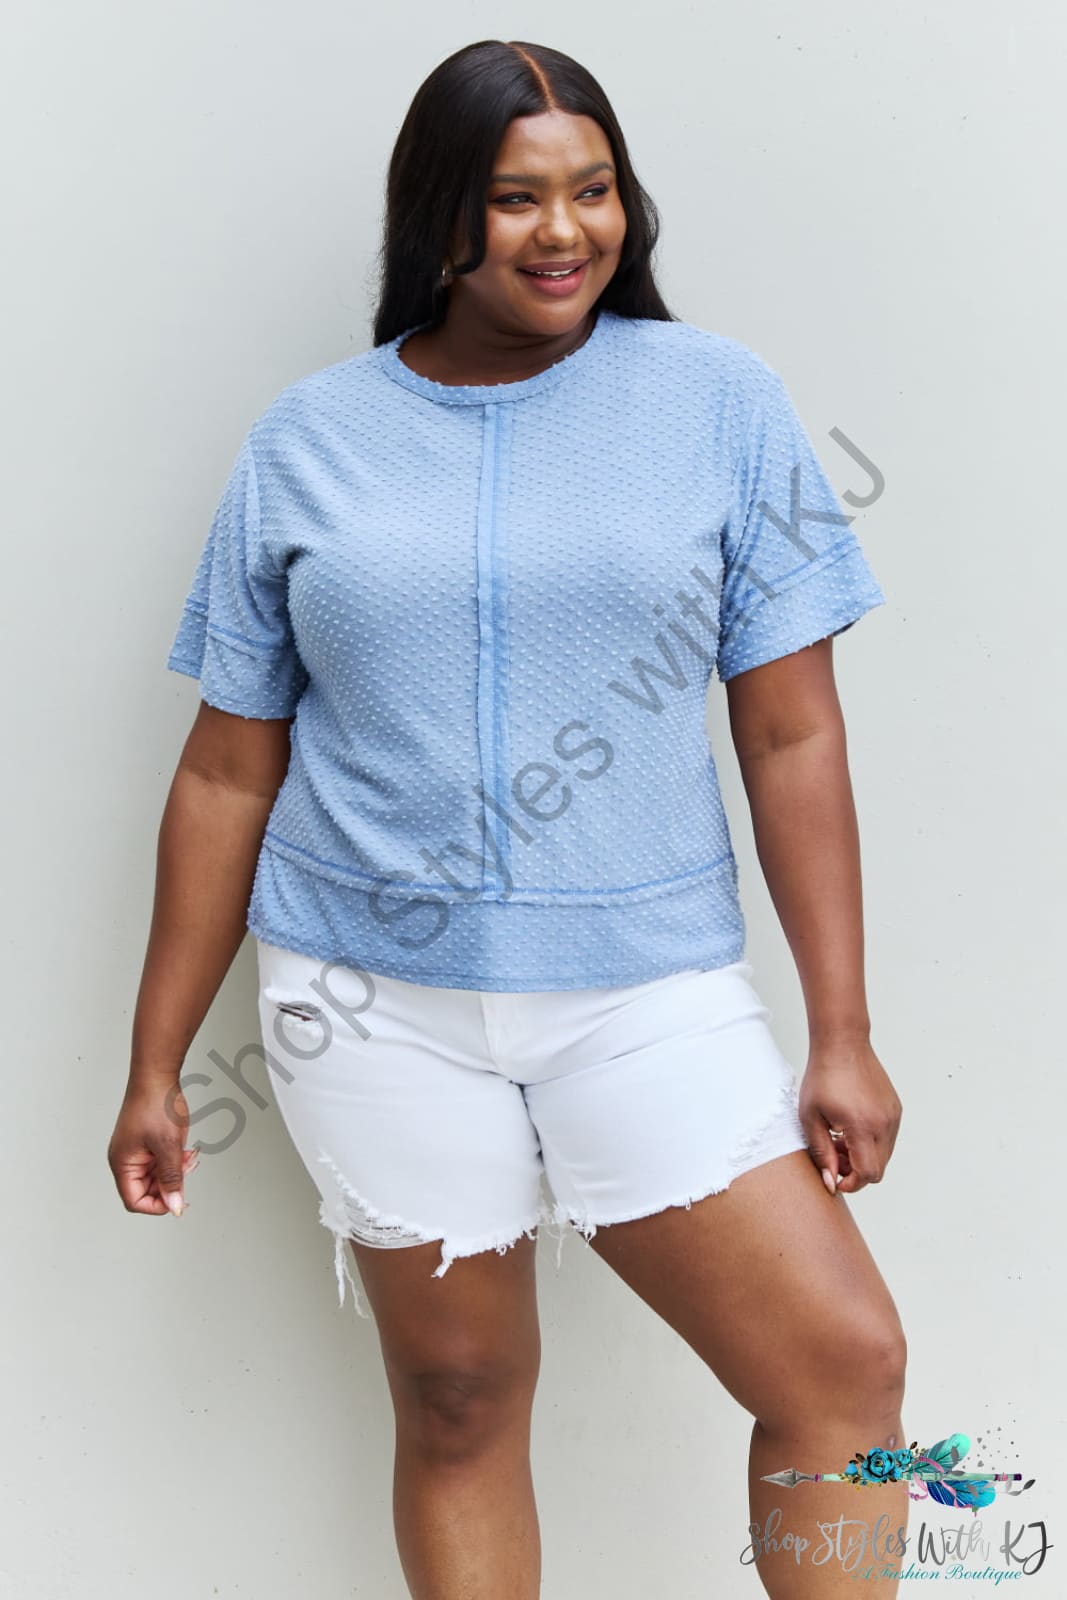 Cater 2 You Swiss Dot Reverse Stitch Short Sleeve Top Shirts & Tops